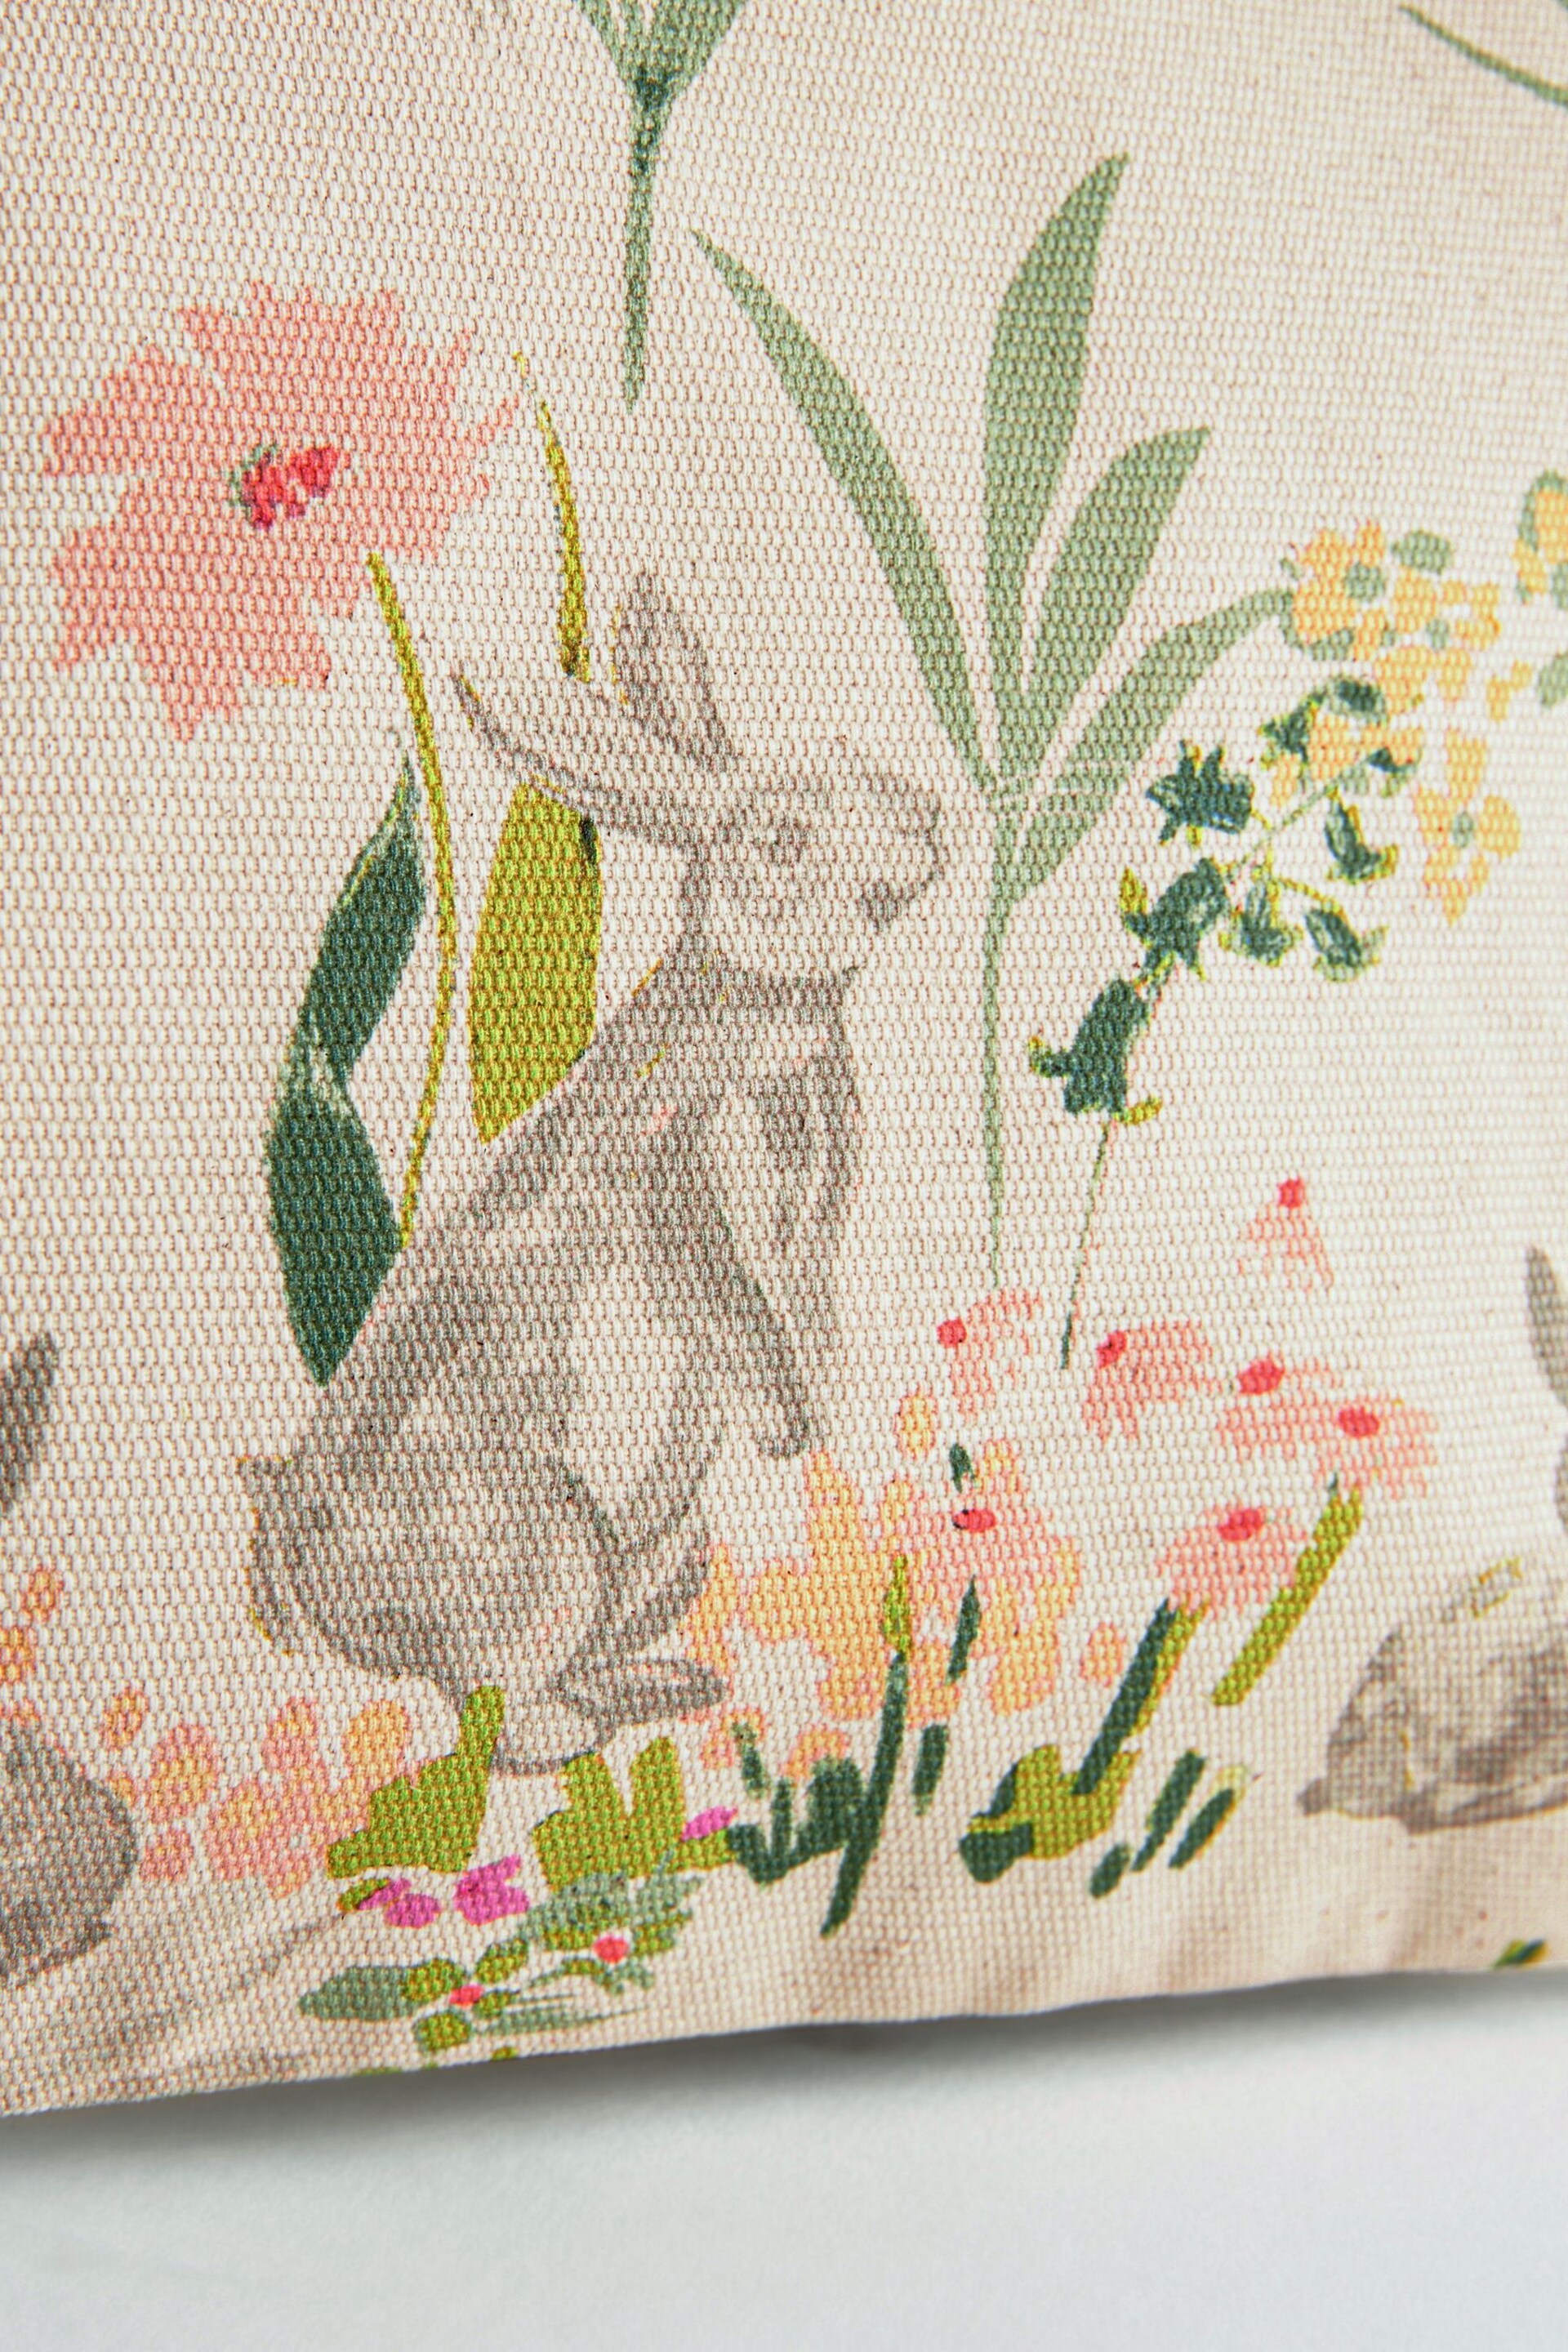 Bunny Print Cotton Canvas Zip Pouch - Image 4 of 5